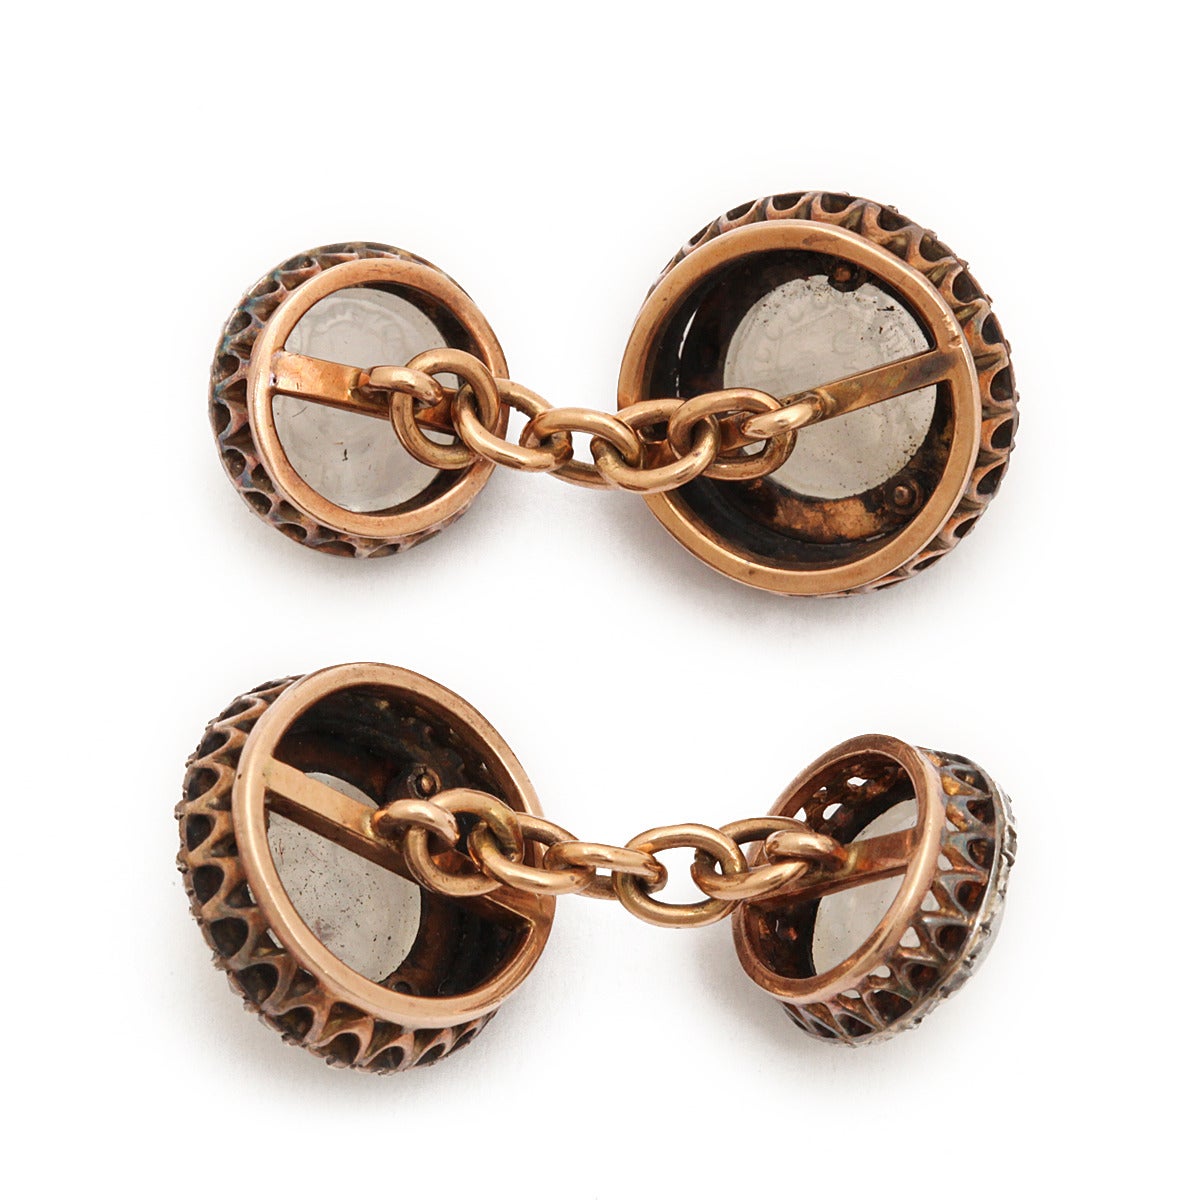 Carved mask moonstone double cufflinks with rose-cut diamond surrounds, mounted in rose gold.

English, ca. 1870.